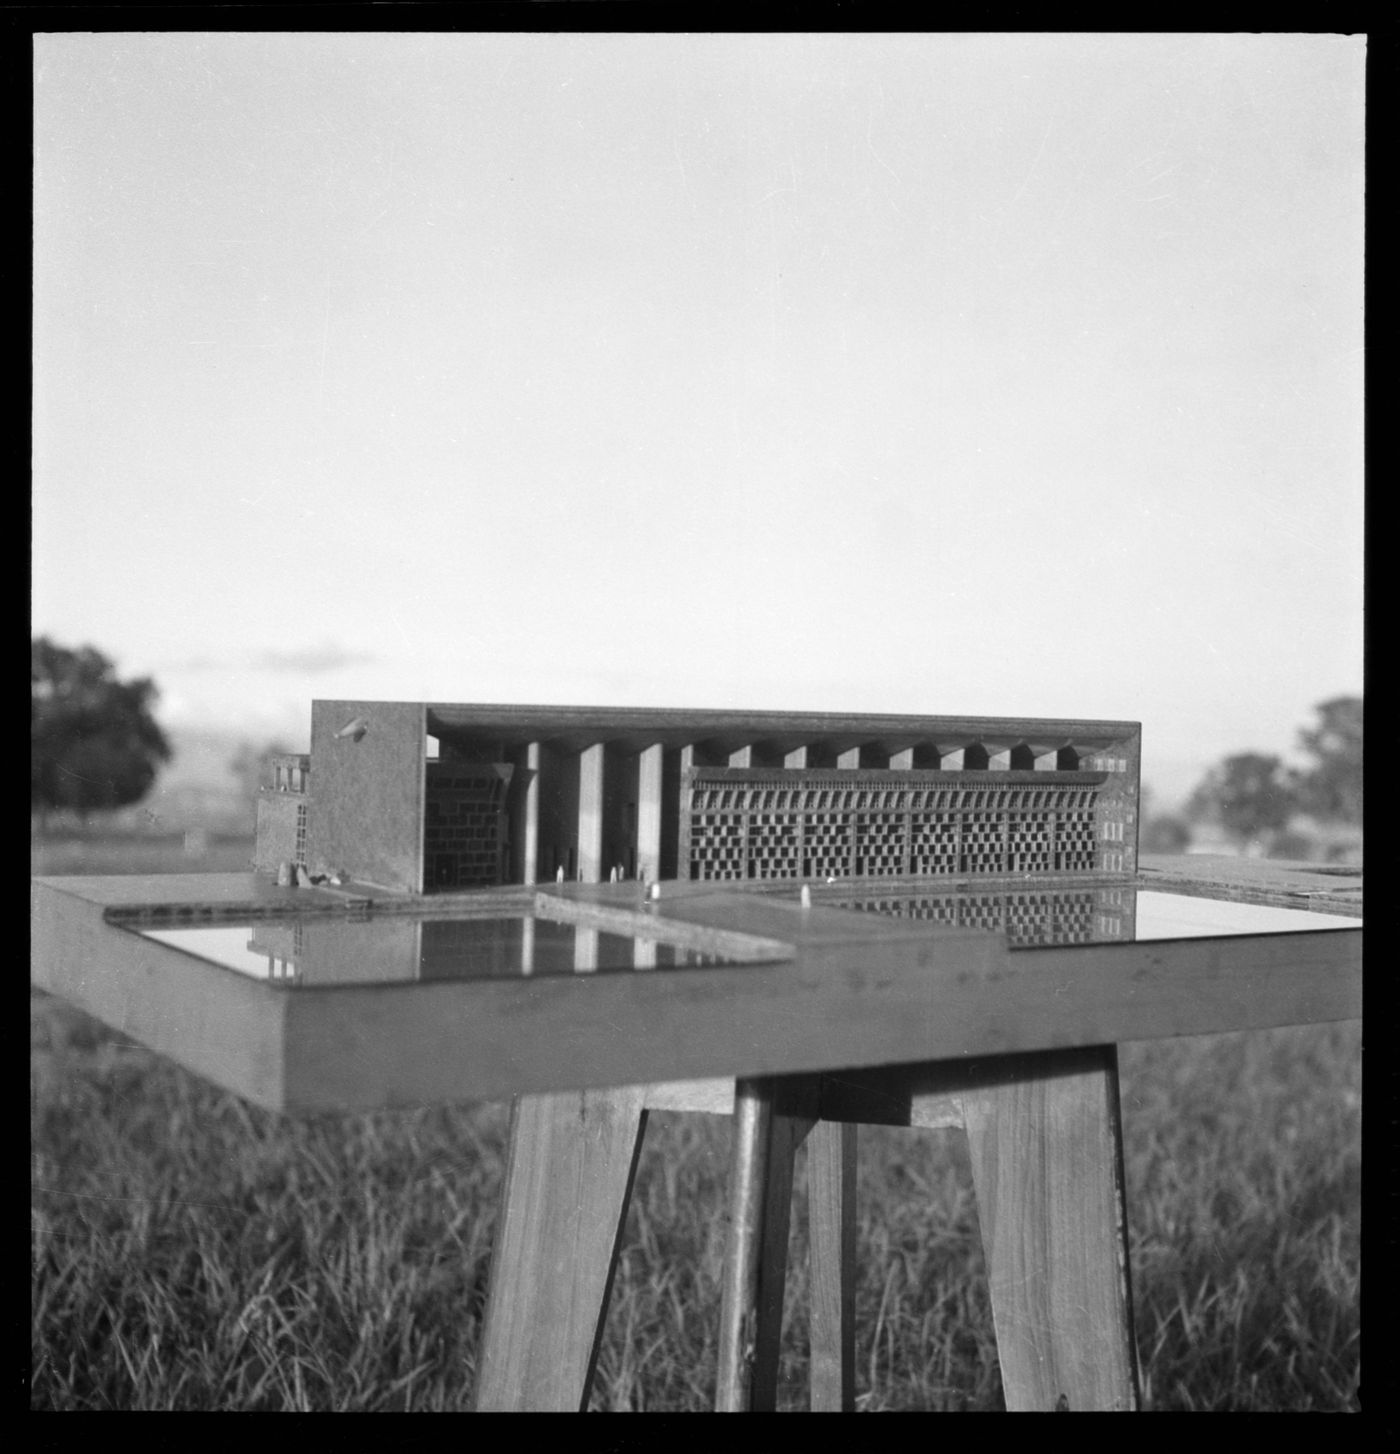 View of the model for High Court, Capitol Complex, Sector 1, Chandigarh, India